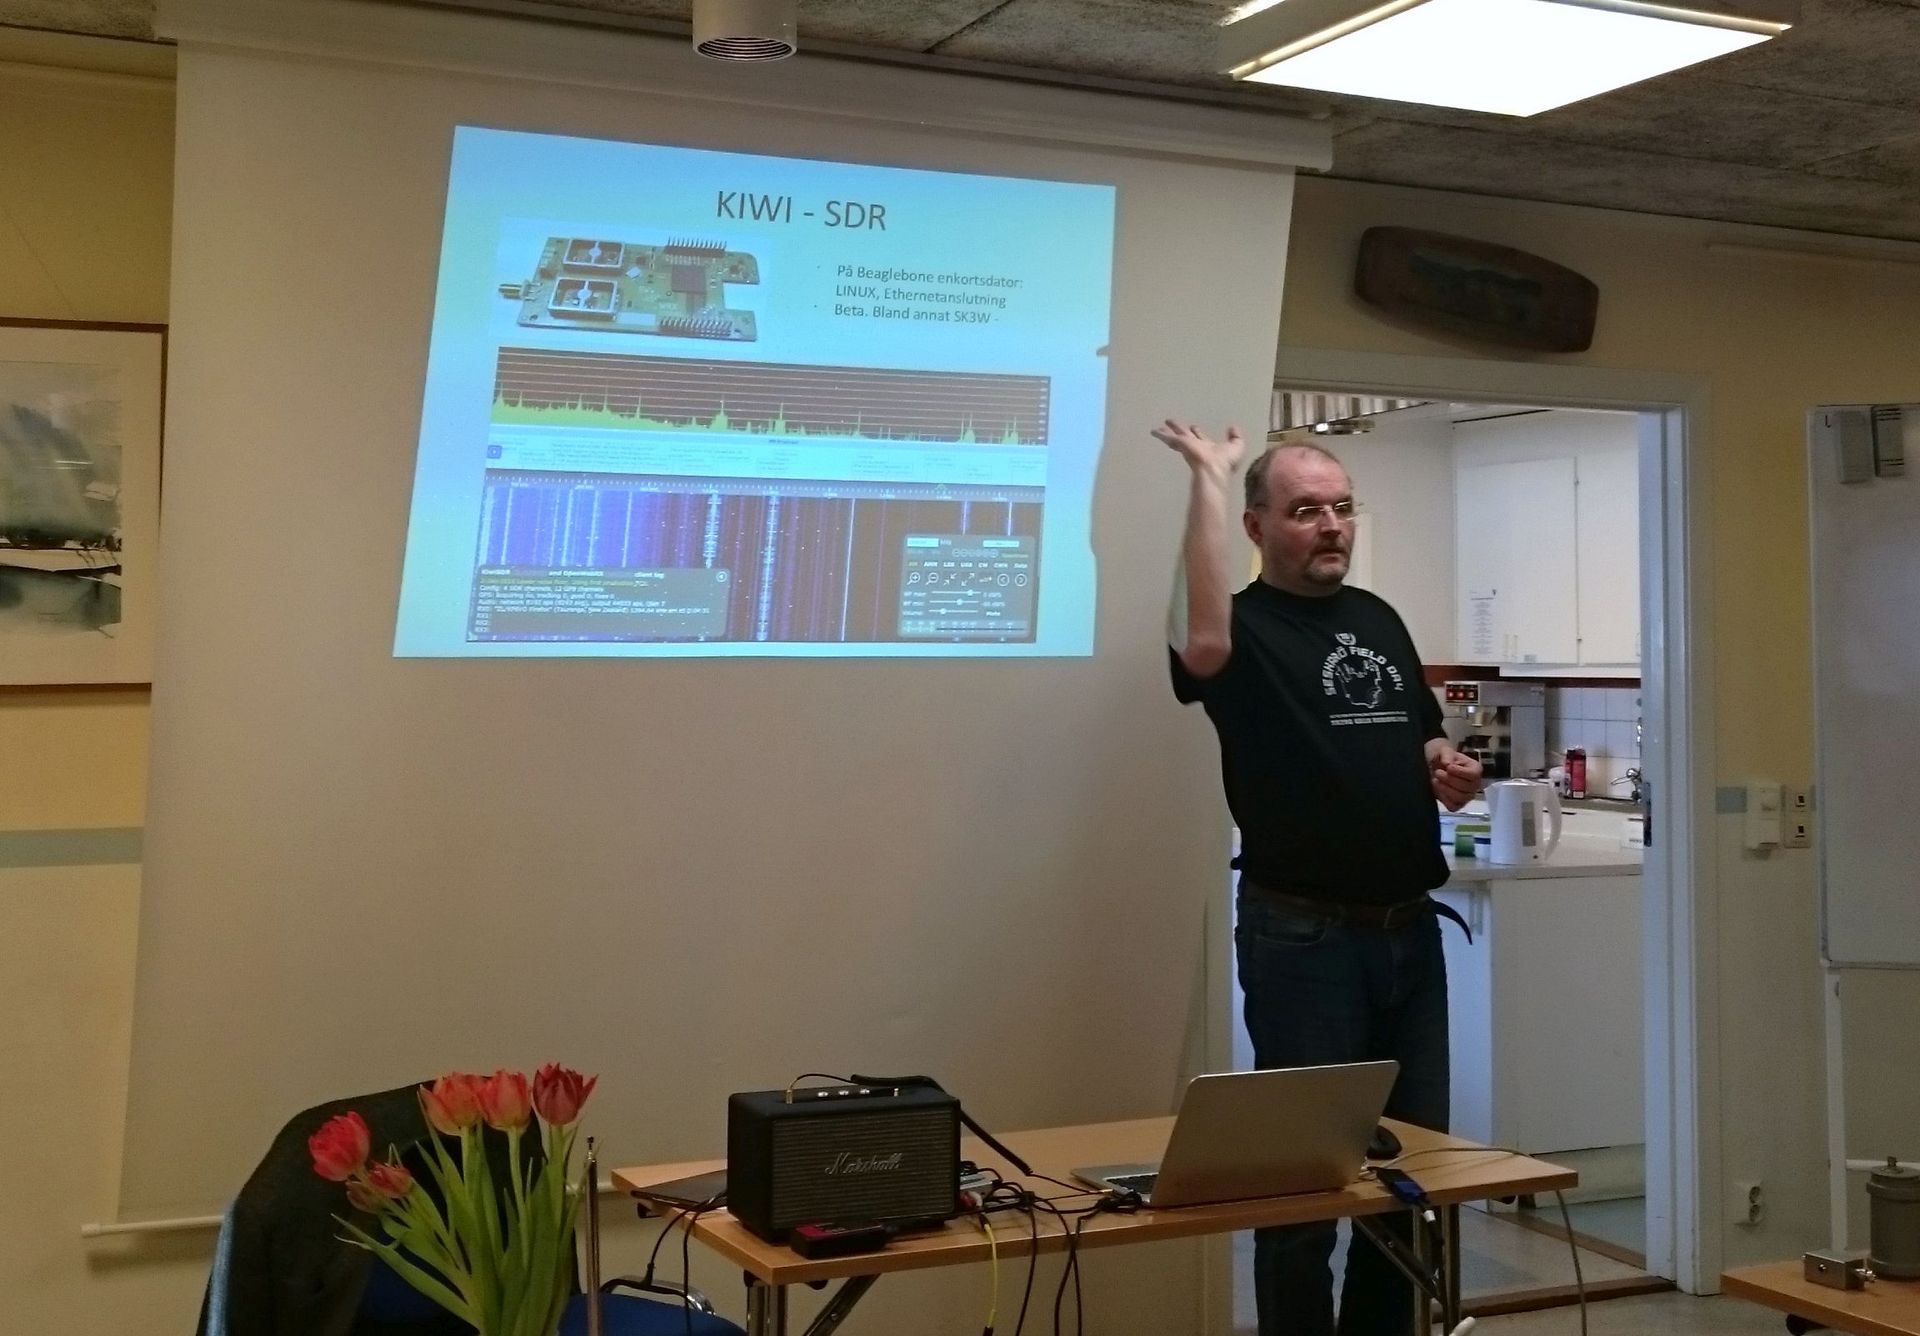 Tilman Thulesius presents different SDR receivers